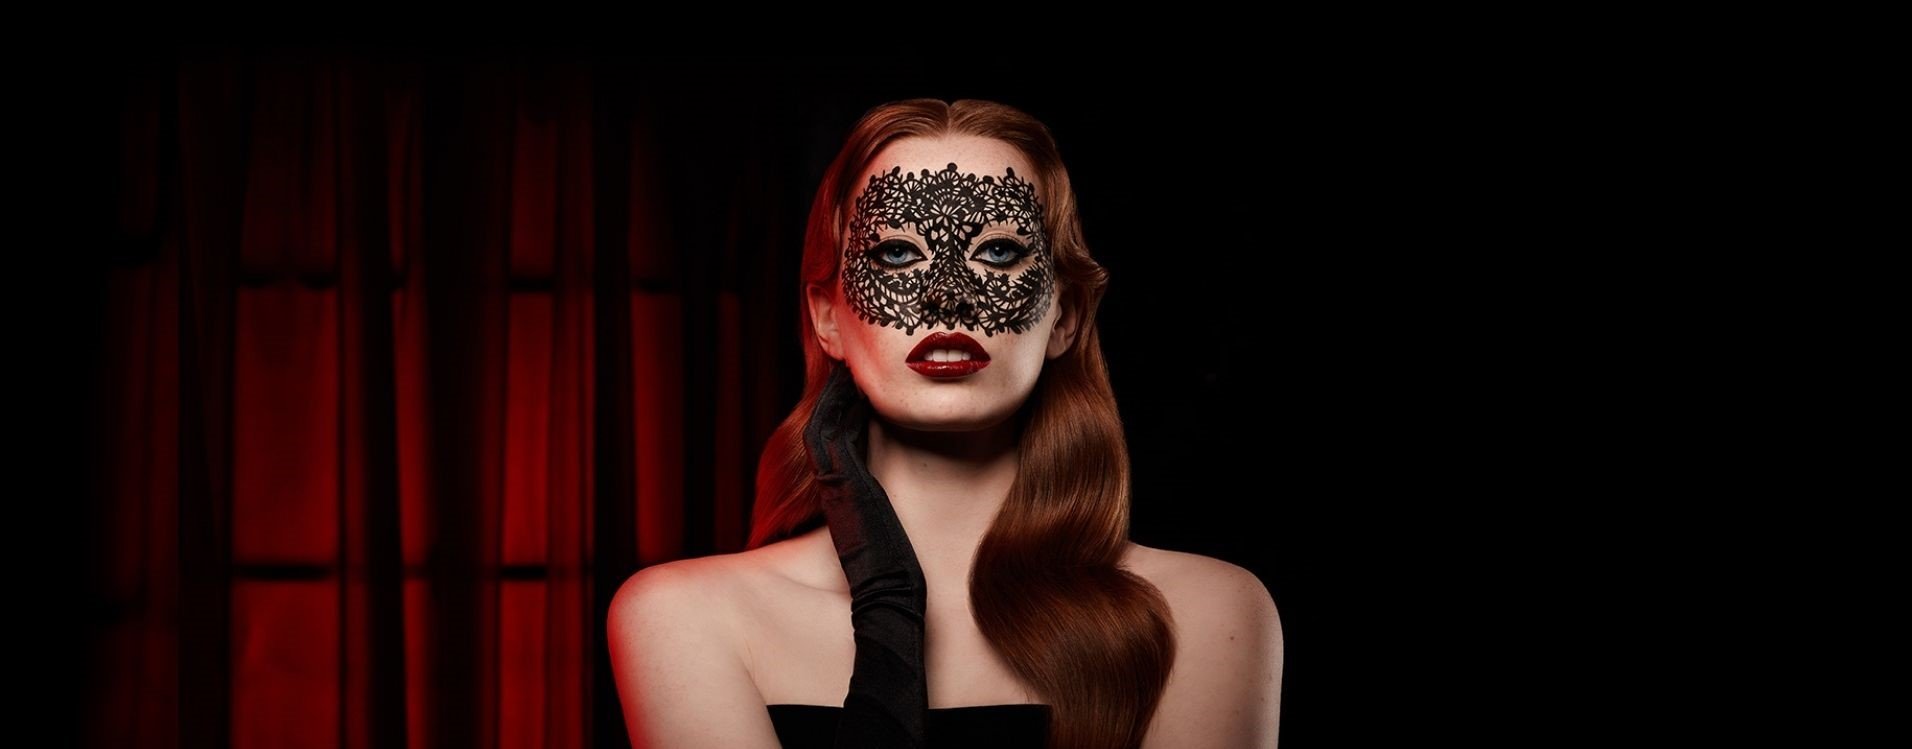 FRIGHT OR ENTICE: LACE MASK HOW TO 